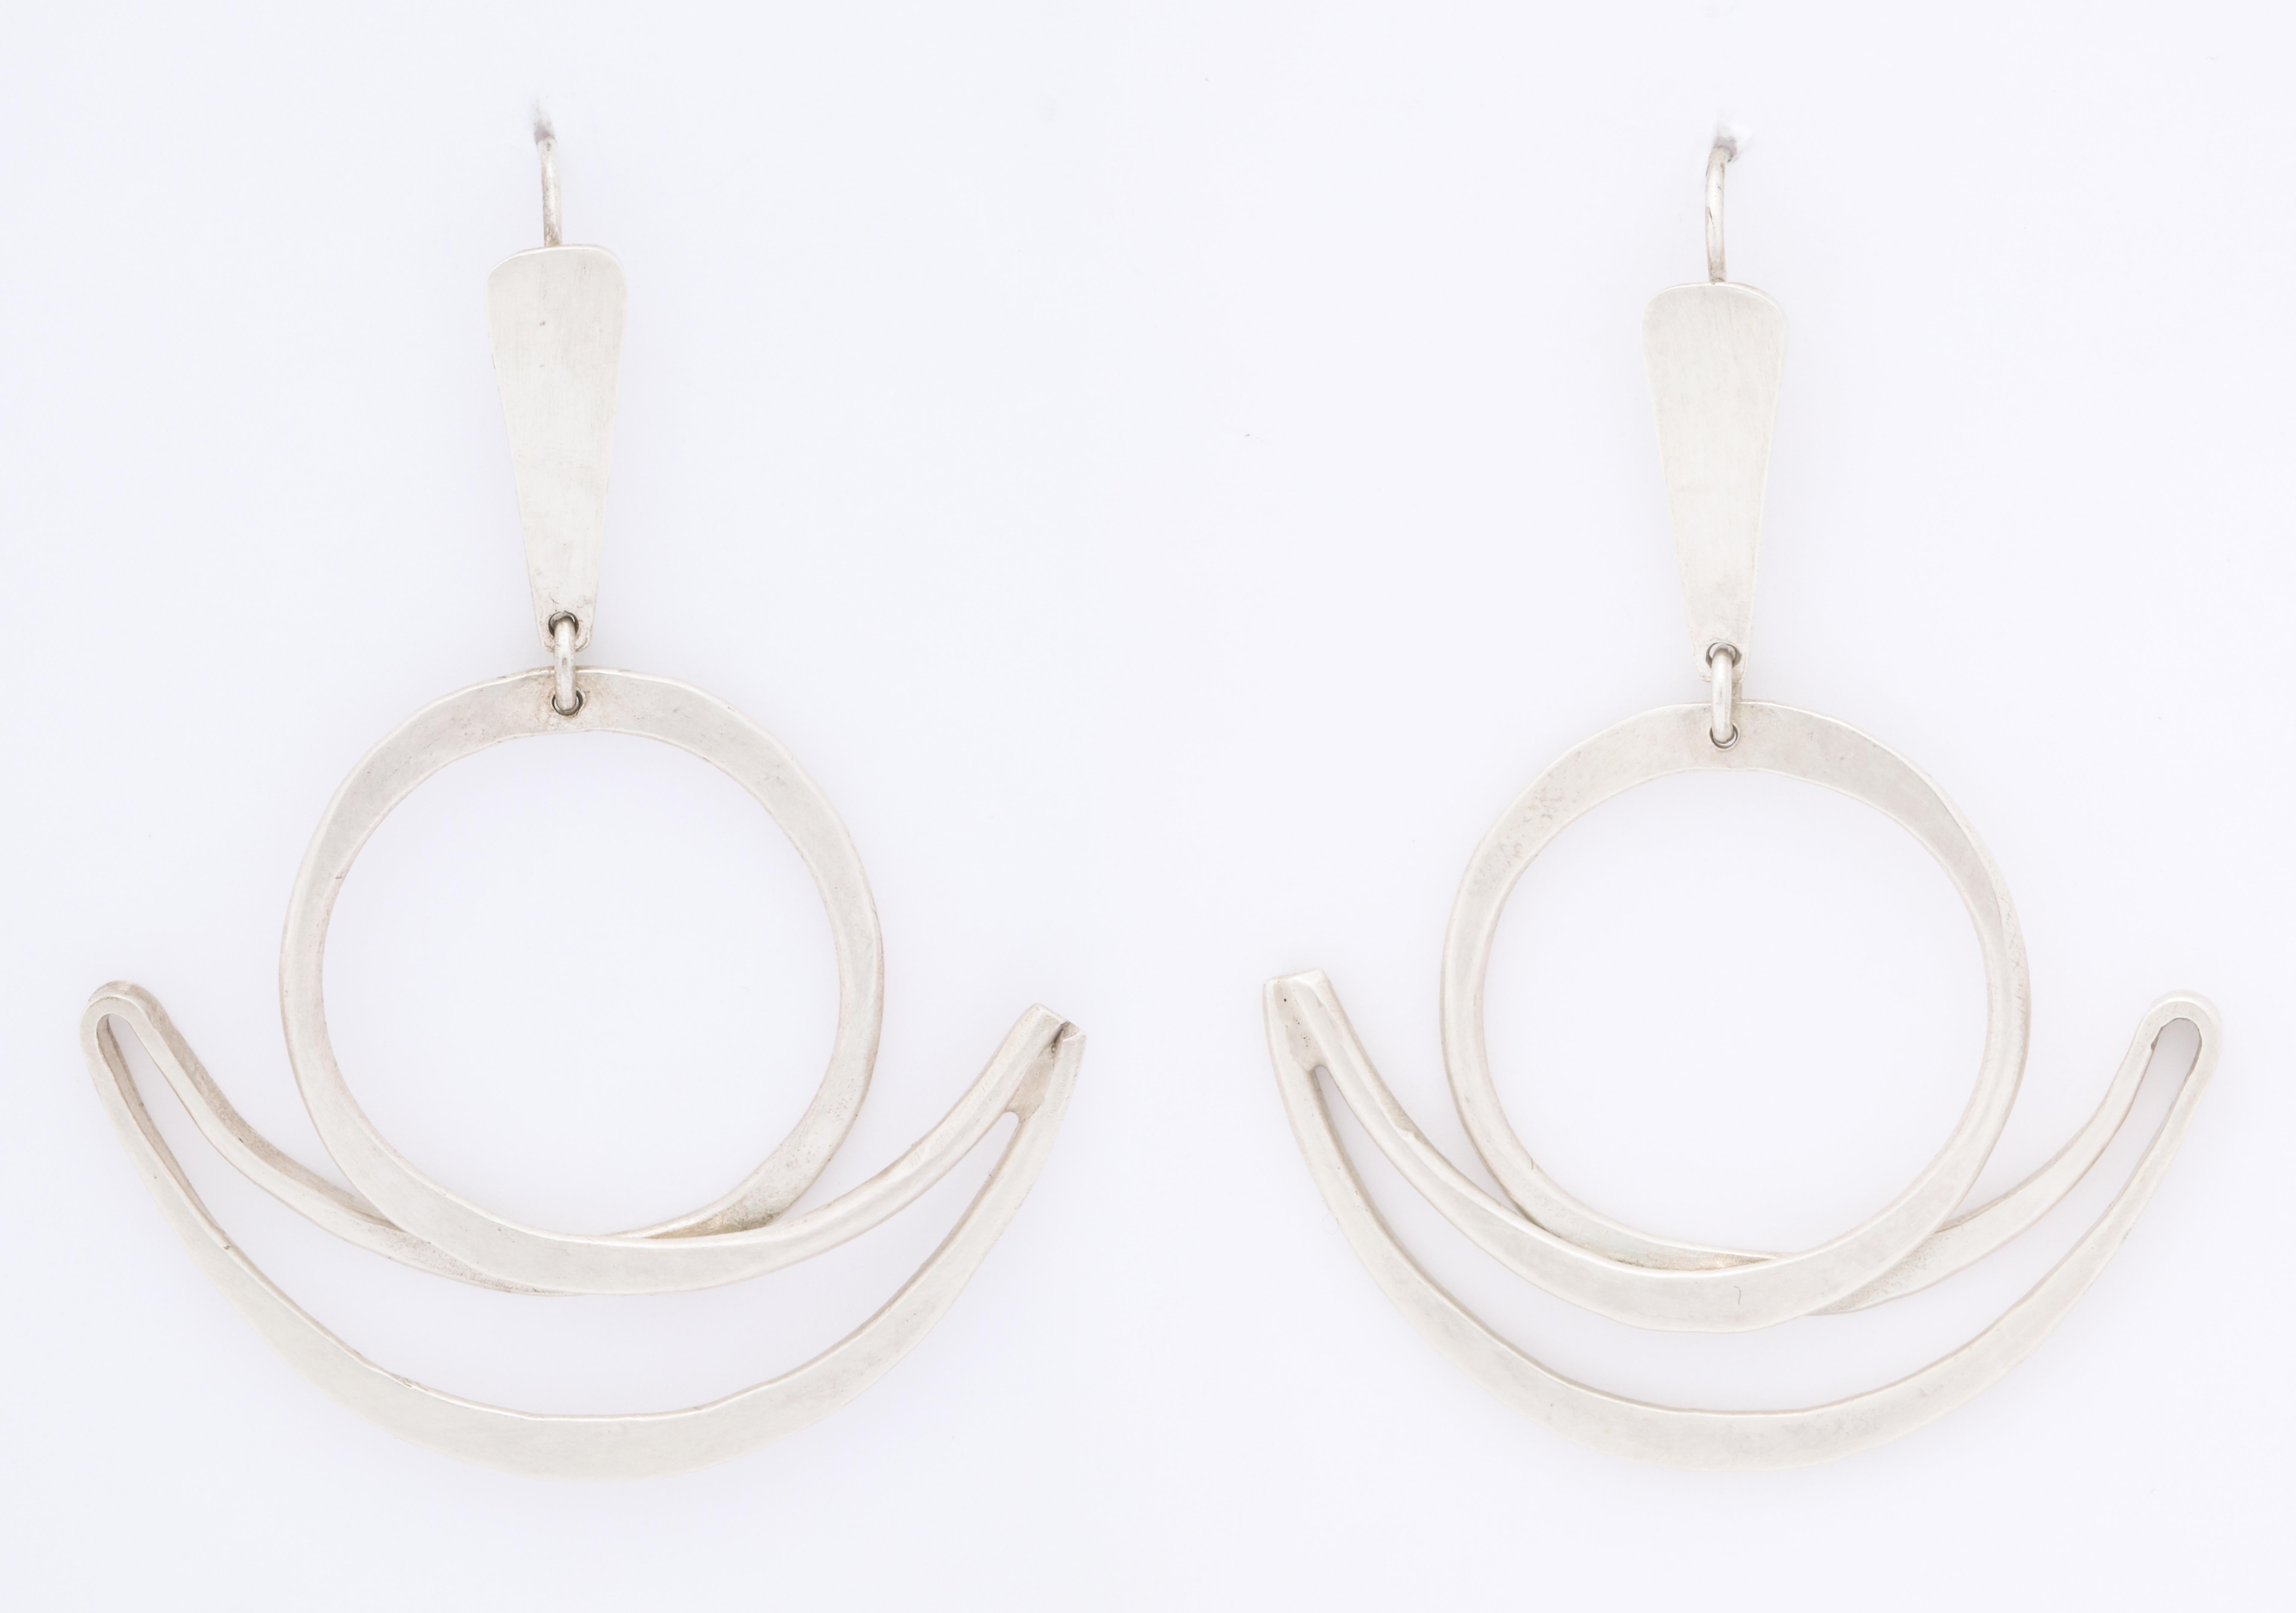 Large, rare form in signed Art Smith chandelier earrings have a solidity in the crescent and moon design. Art Smith is highly desirable, stops traffic at shows and to this day remains a famous African American Jewelry designer. 
Modernist silver